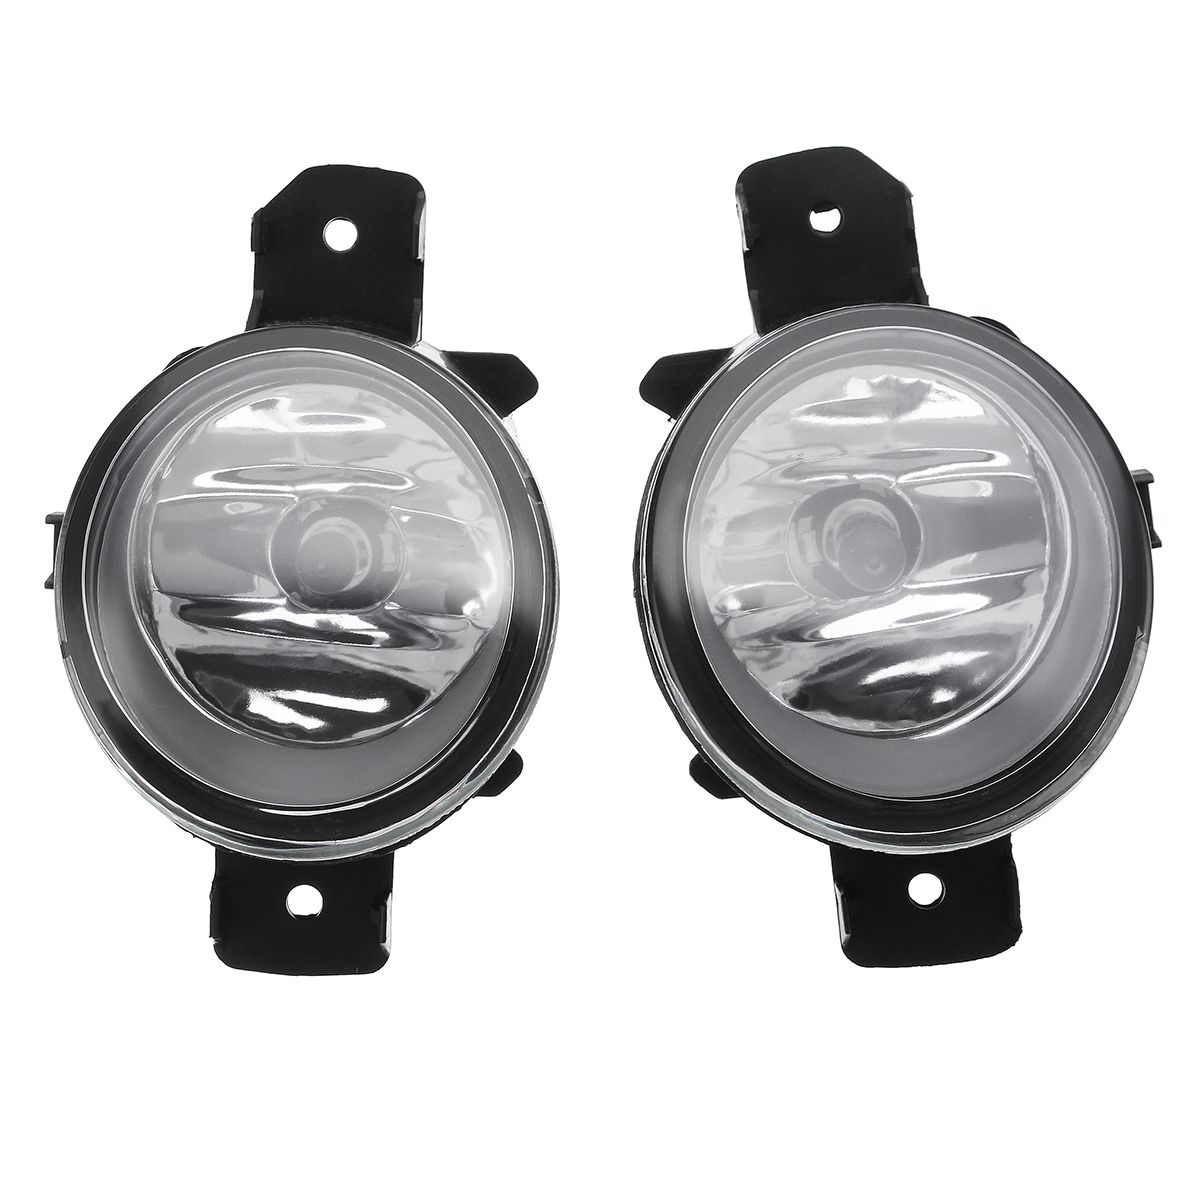 2Pcs-Car-Front-Bumper-Fog-Light-LampGrilles-with-Harness-For-Nissan-Sentra-2017-2019-1679406